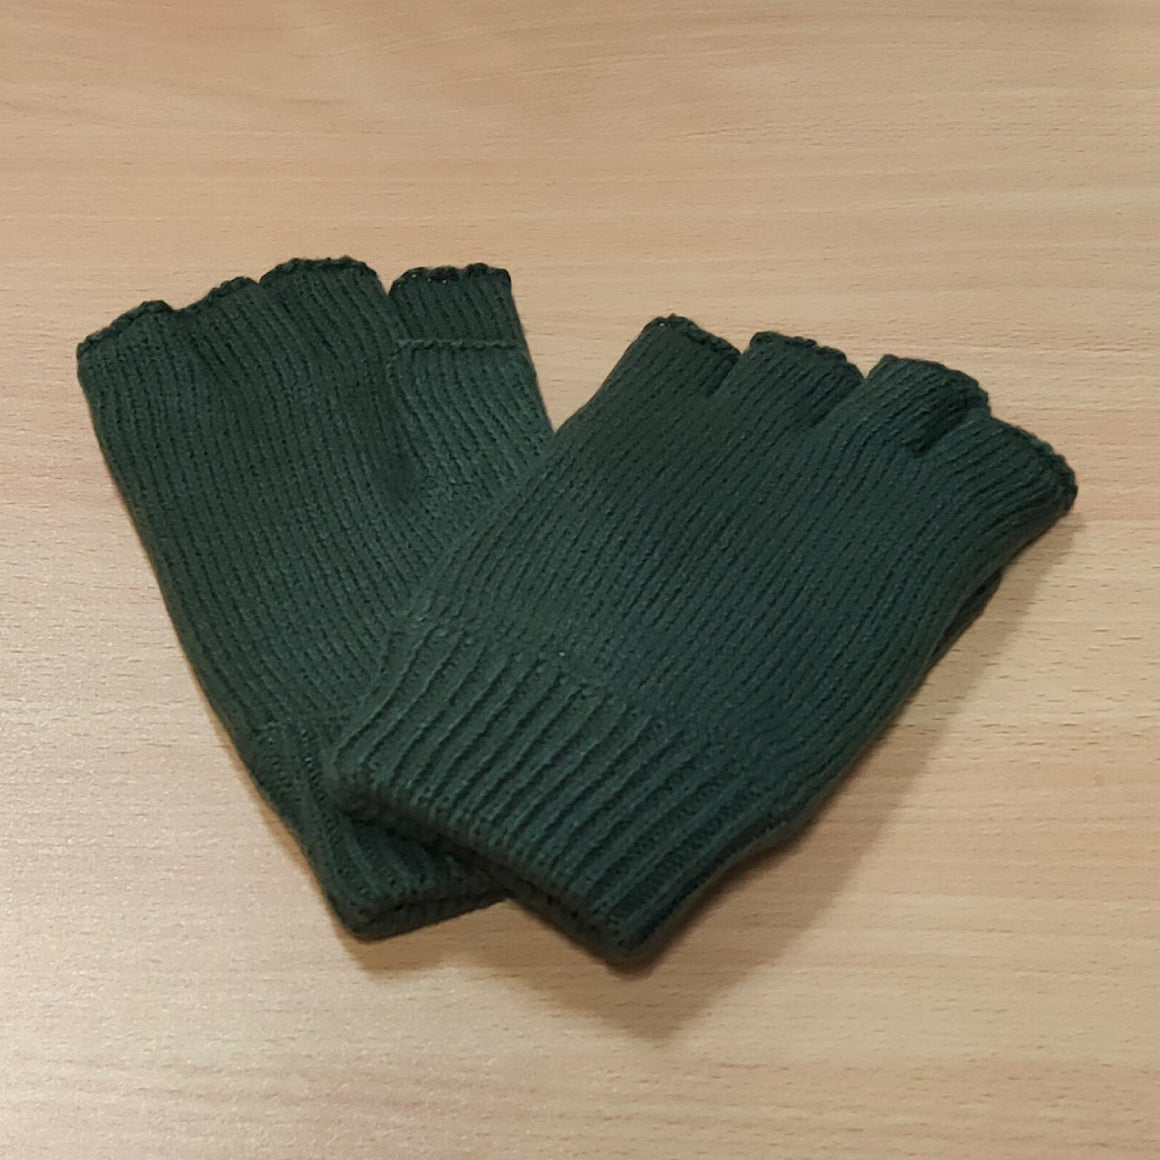 Avenel Acrylic Fingerless Glove With Thinsulate Lining - Olive